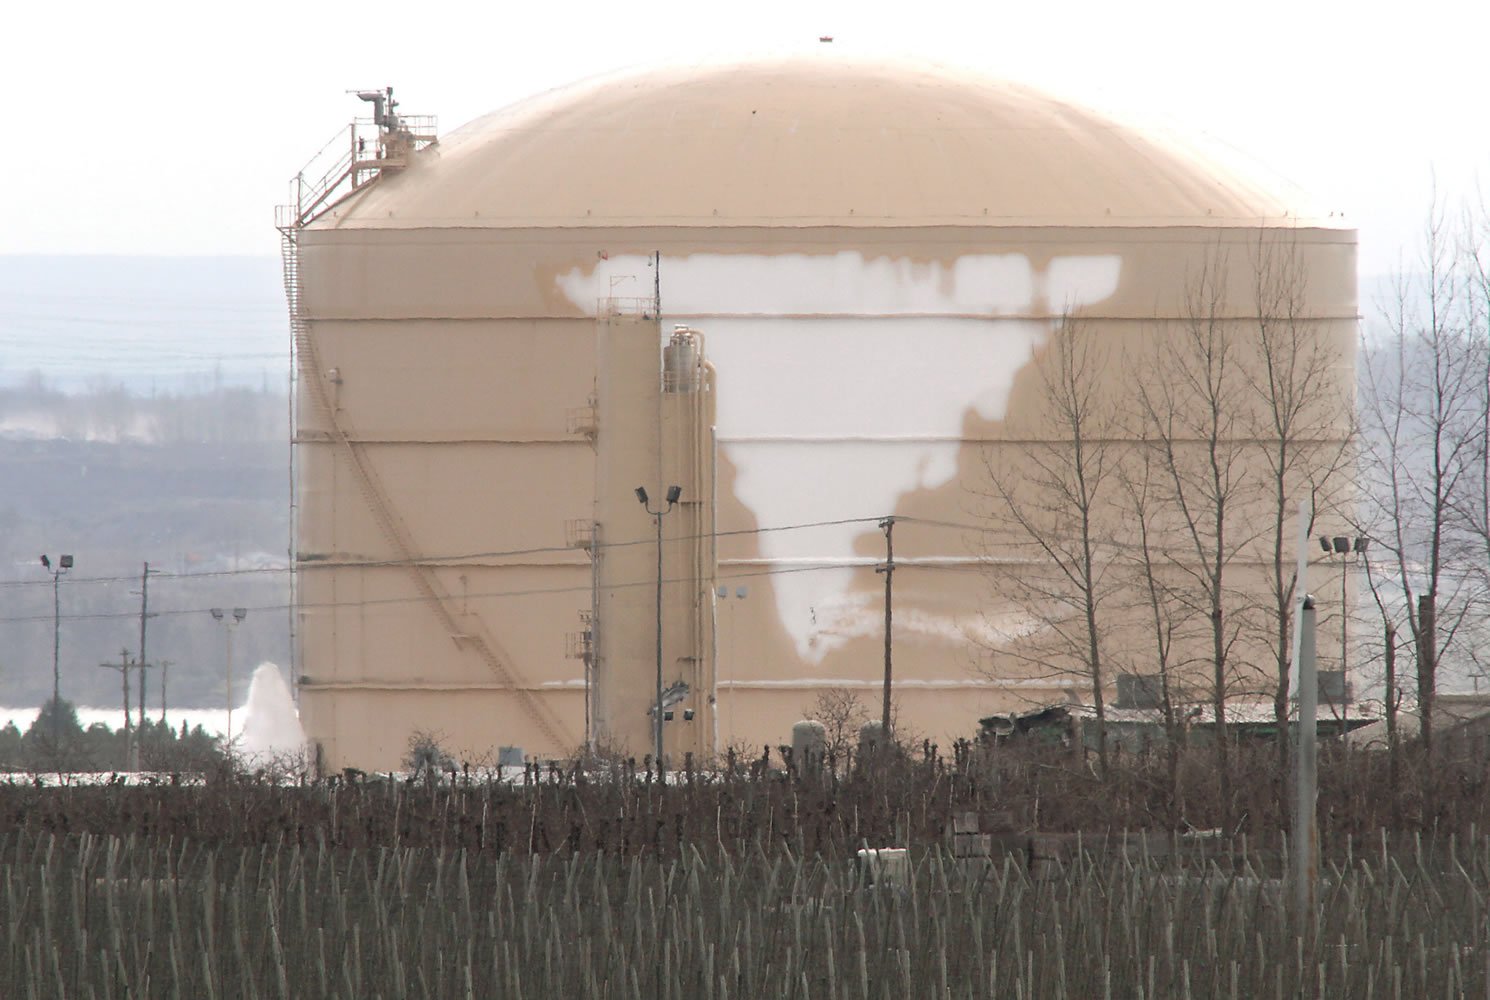 Liquefied natural gas vapors continue to leak Tuesday, leaving a frosty coating on the damaged storage tank at the Williams Northwest Pipeline facility near Plymouth.